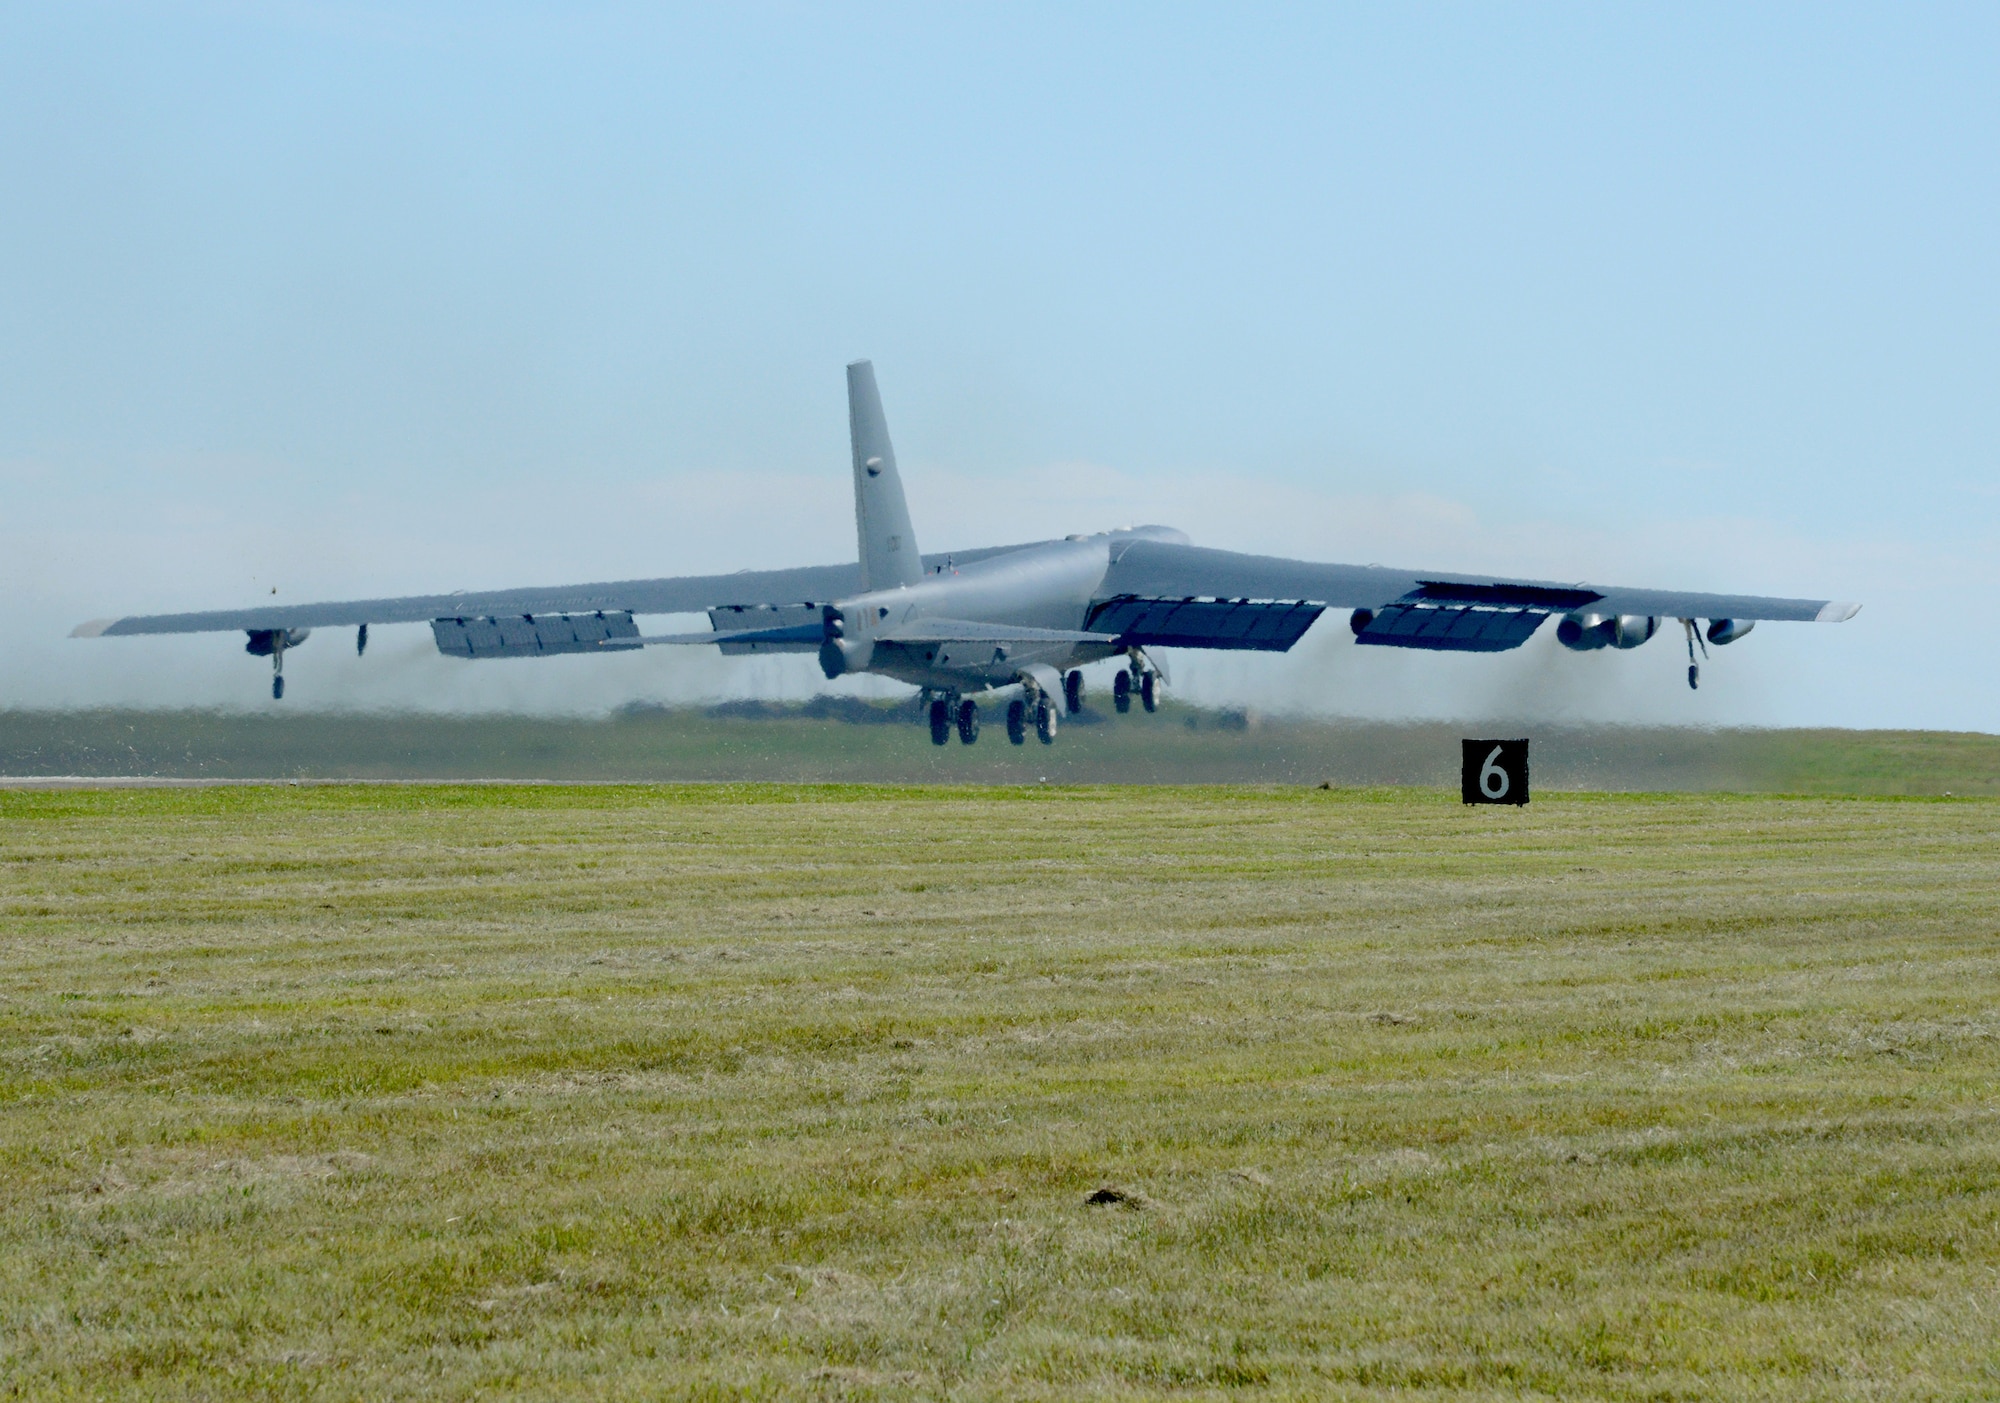 “Ghost Rider,” lifts off for Minot Air Force Base, N.D., where it will rejoin the B-52H fleet. After undergoing a nine-month overhaul and upgrade by the Oklahoma City Air Logistics Complex, 61-007 left Tinker Air Force Base Sept. 27, 2016. The historic aircraft is the first B-52H to ever be regenerated from long-term storage with the 309th Aerospace Maintenance and Regeneration Group at Davis-Monthan AFB, Ariz., and returned to full operational flying status. (Air Force photo by Kelly White)